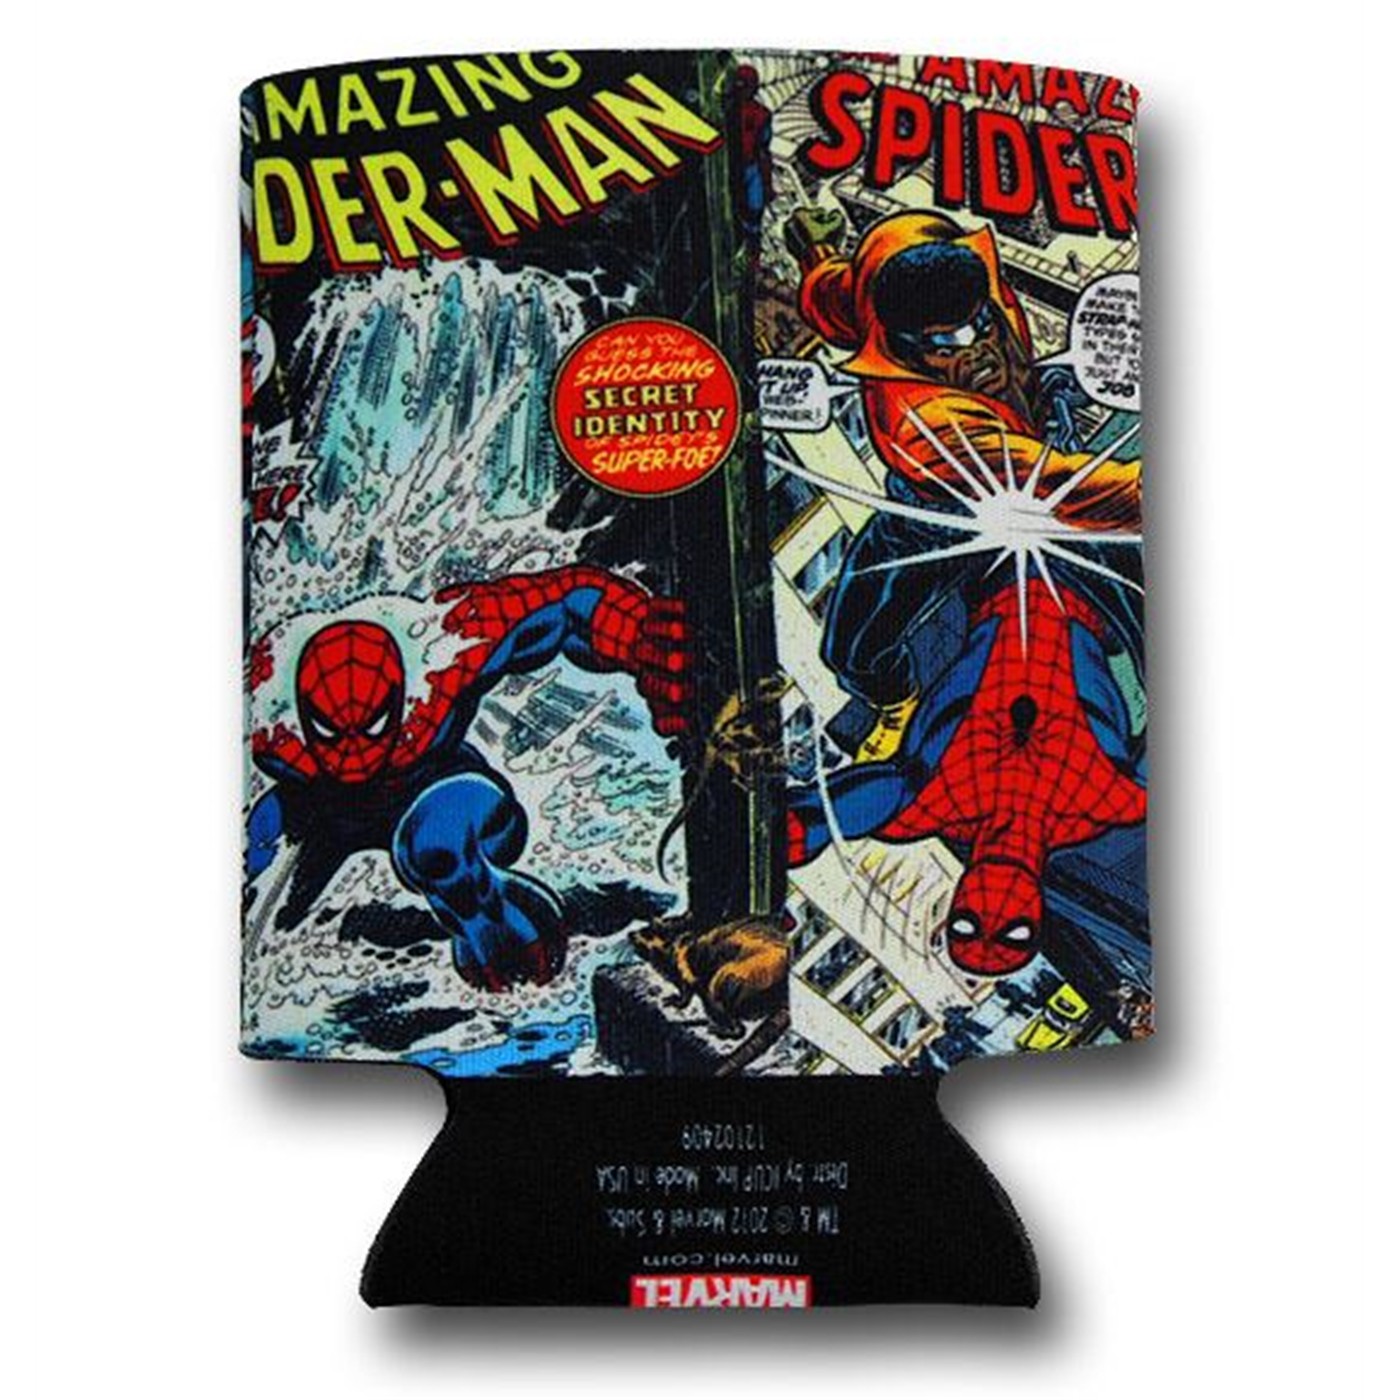 Spiderman Comic Covers Can and Bottle Cooler